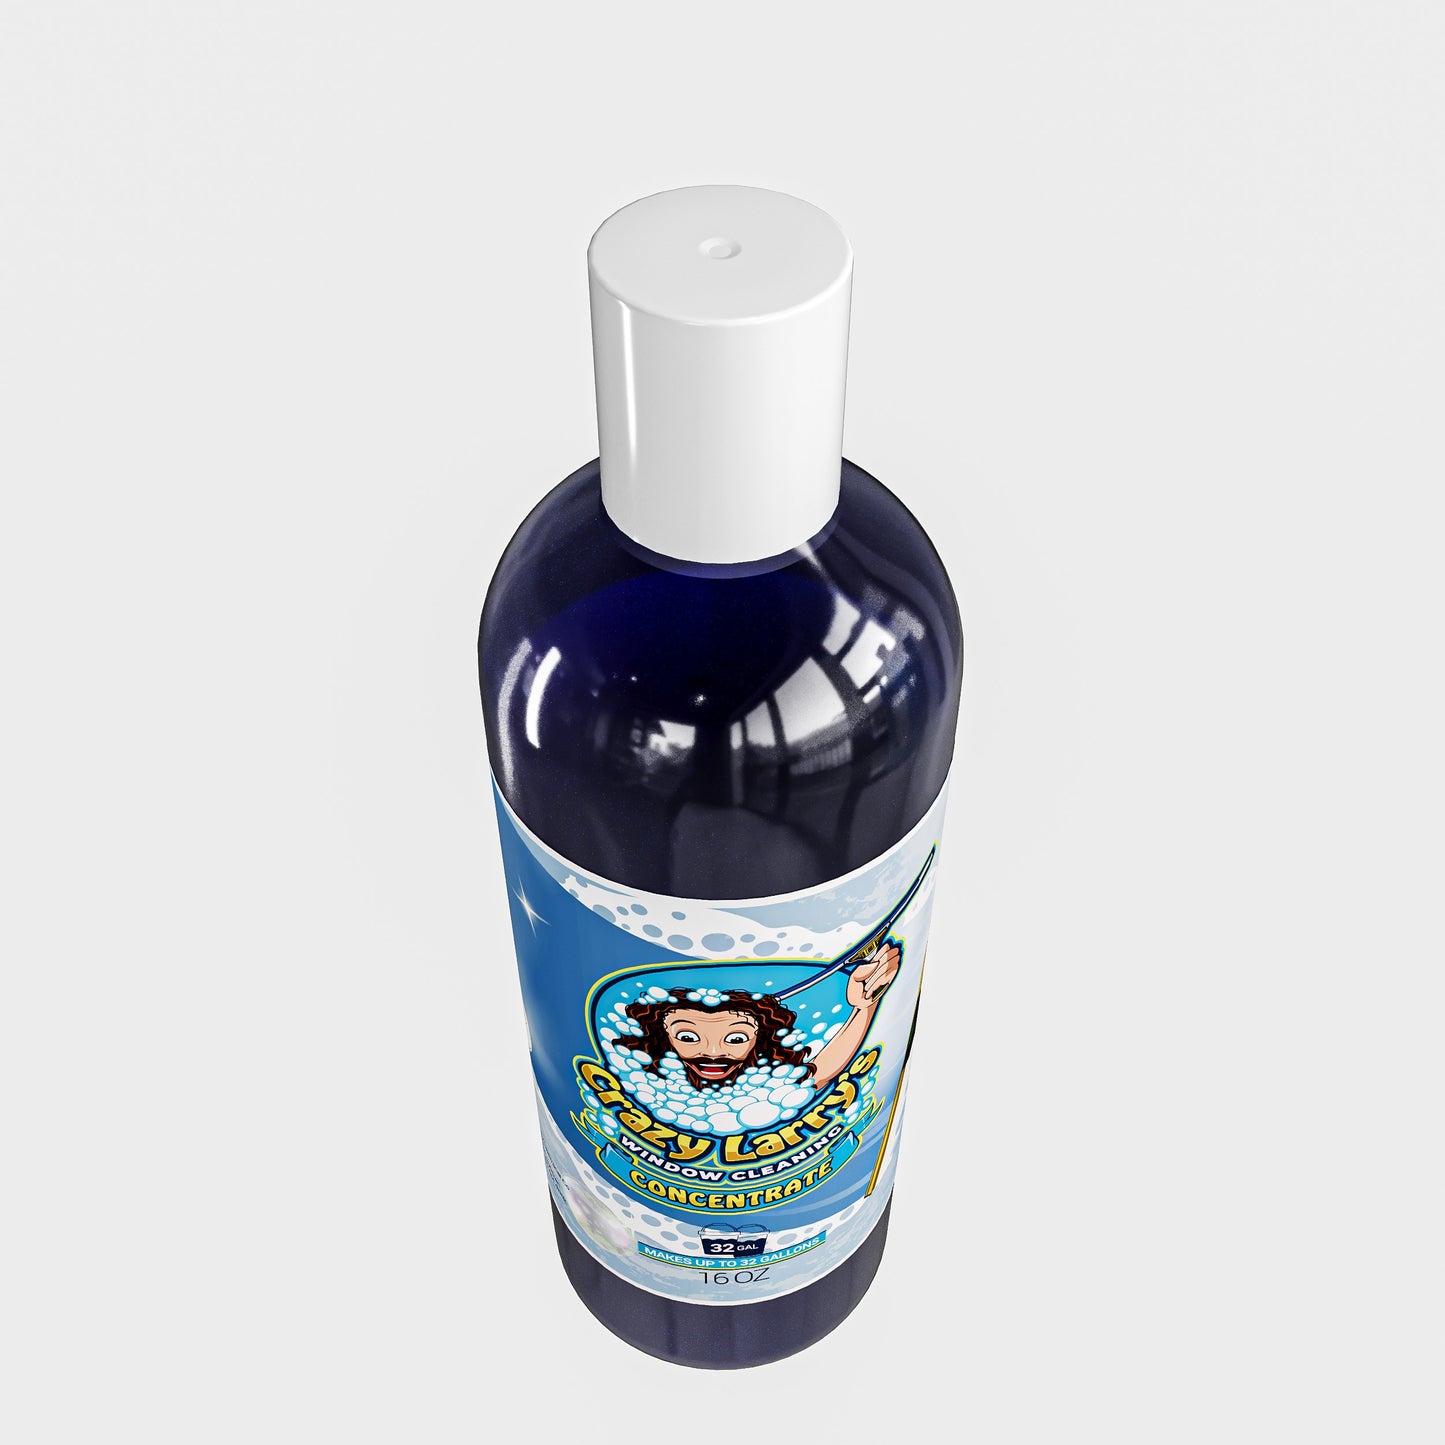 Crazy Larry’s Window Cleaning Concentrate - 16 oz